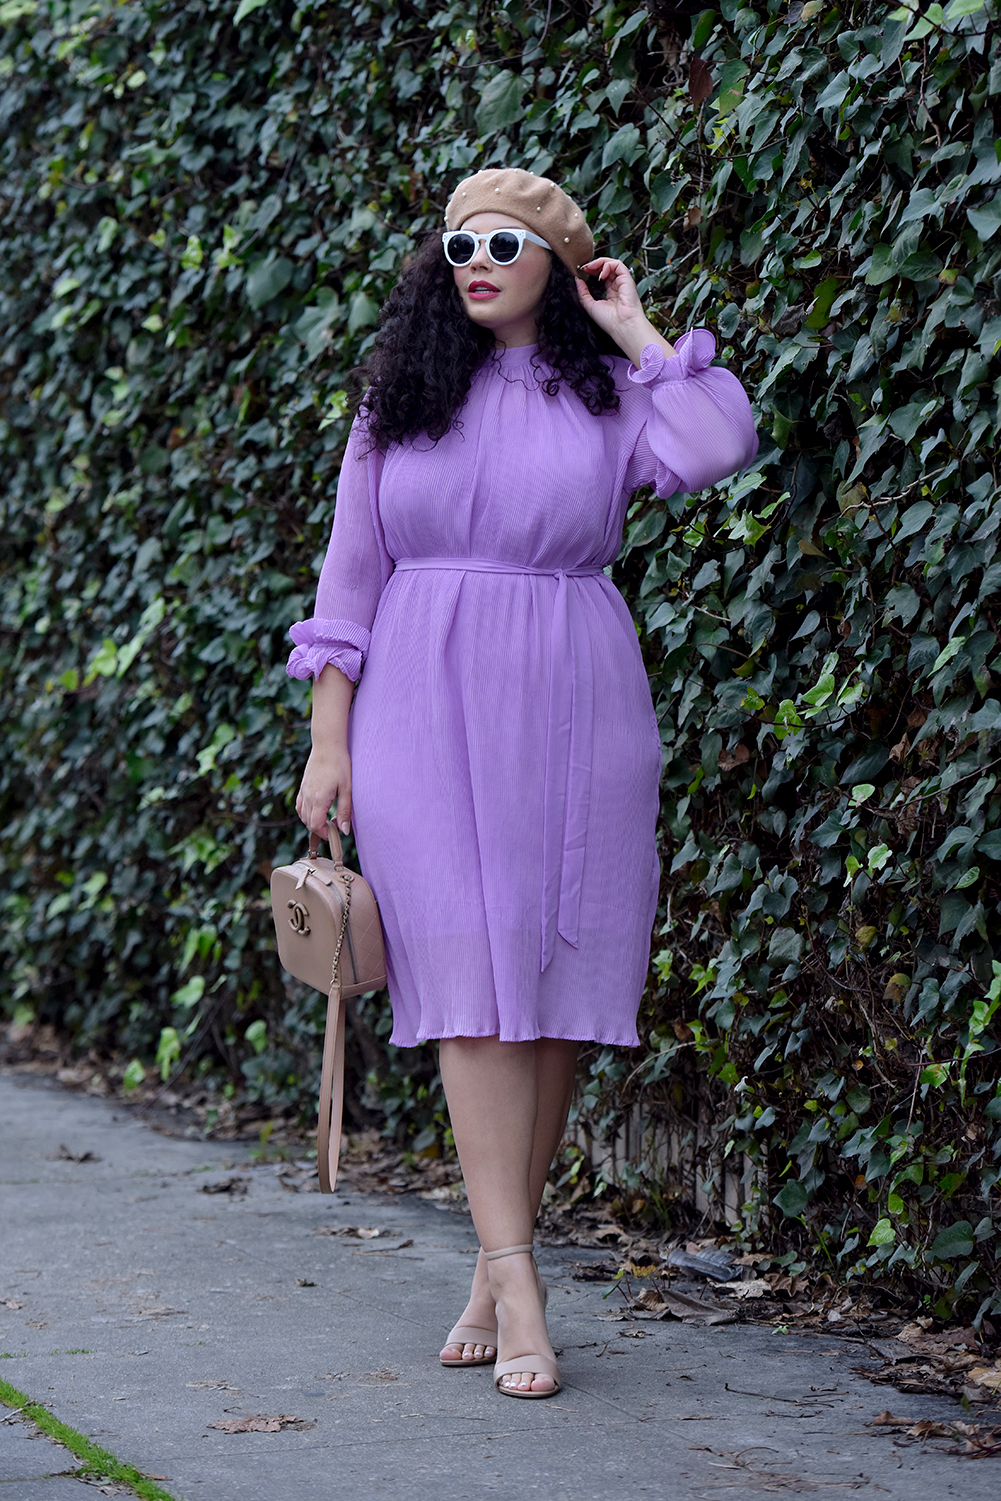 This Is How I'm Styling Midi Dresses Right Now Via @GirlWithCurves #dresses #midi #outfits #fashion #style